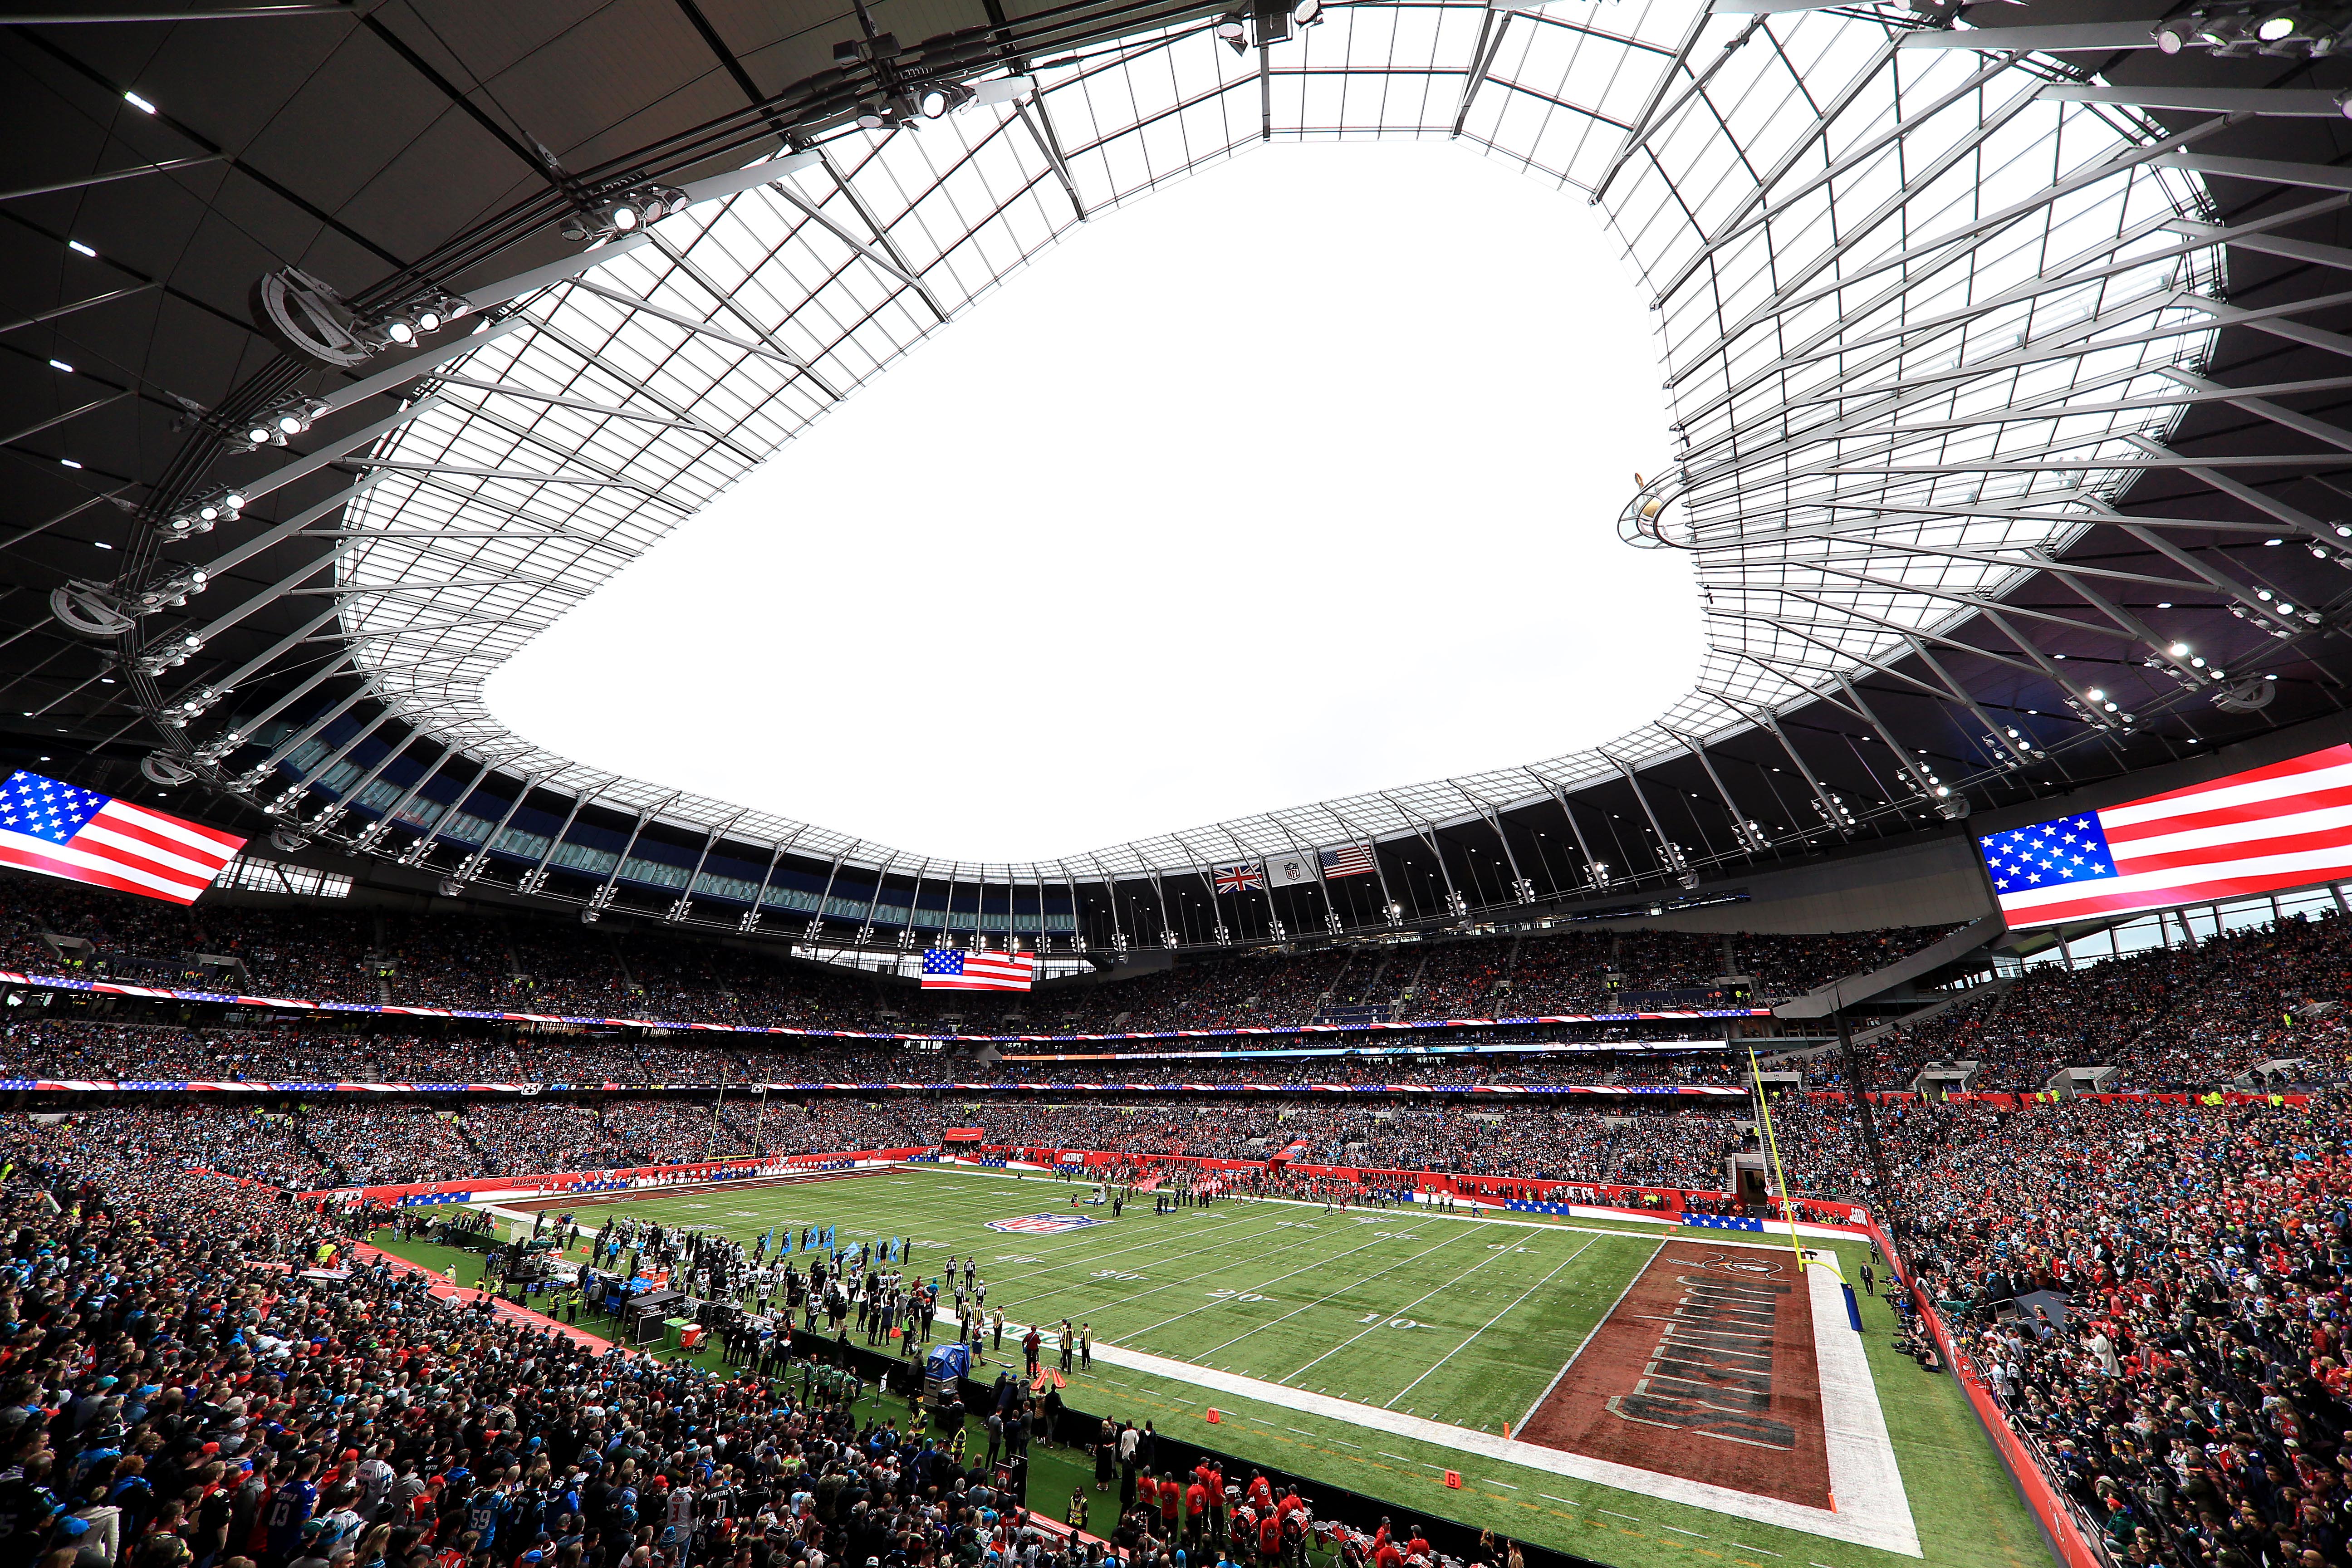 Tottenham Hotspur Stadium hosted Carolina Panthers and Tampa Bay Buccaneers in 2019